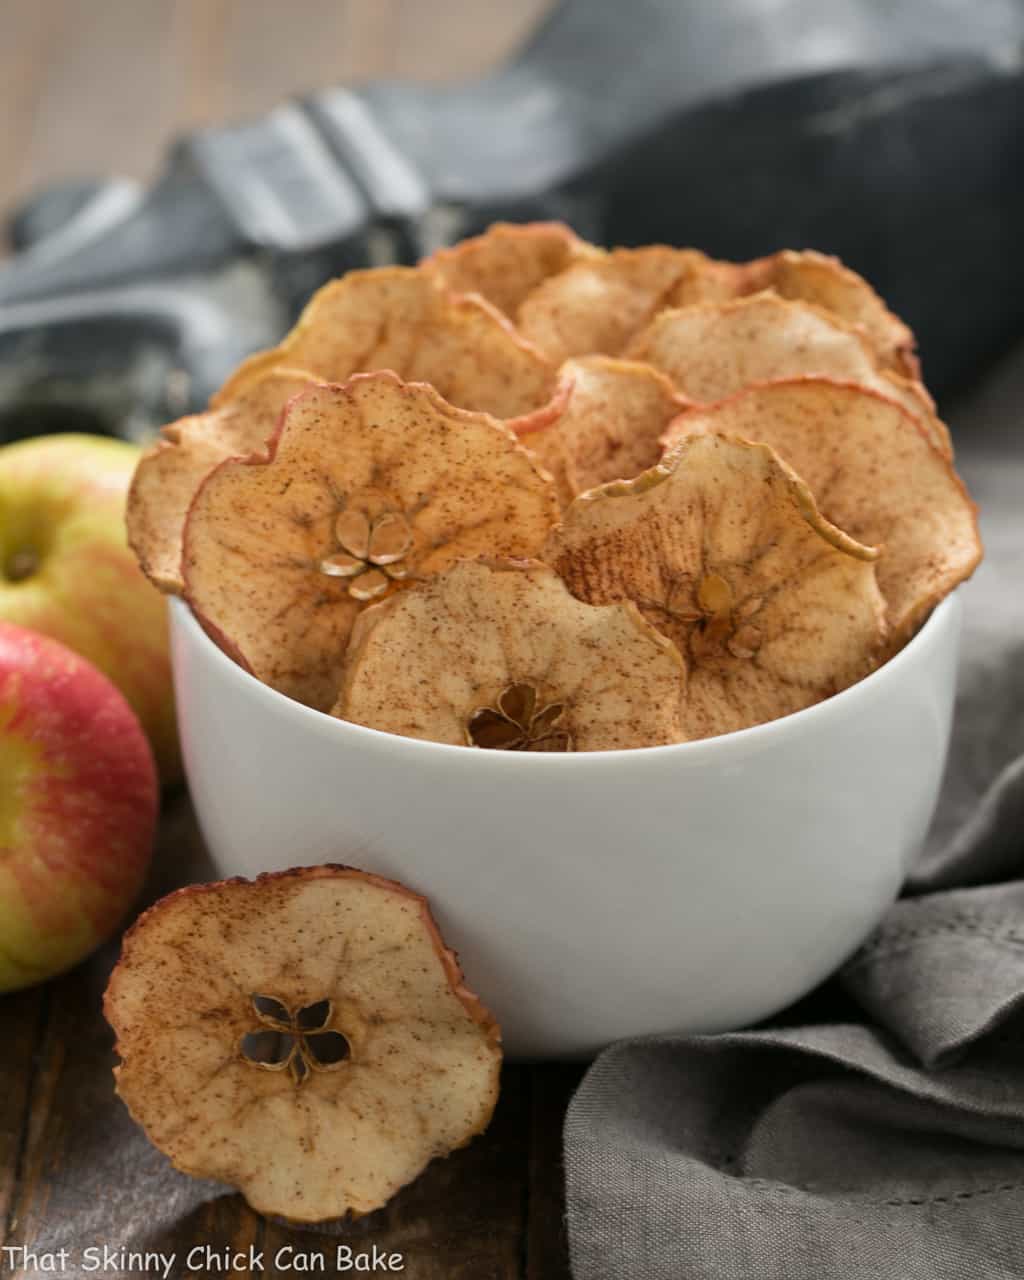 Cinnamon Apple Chips in a white ceramic bowl next to fresh apples.